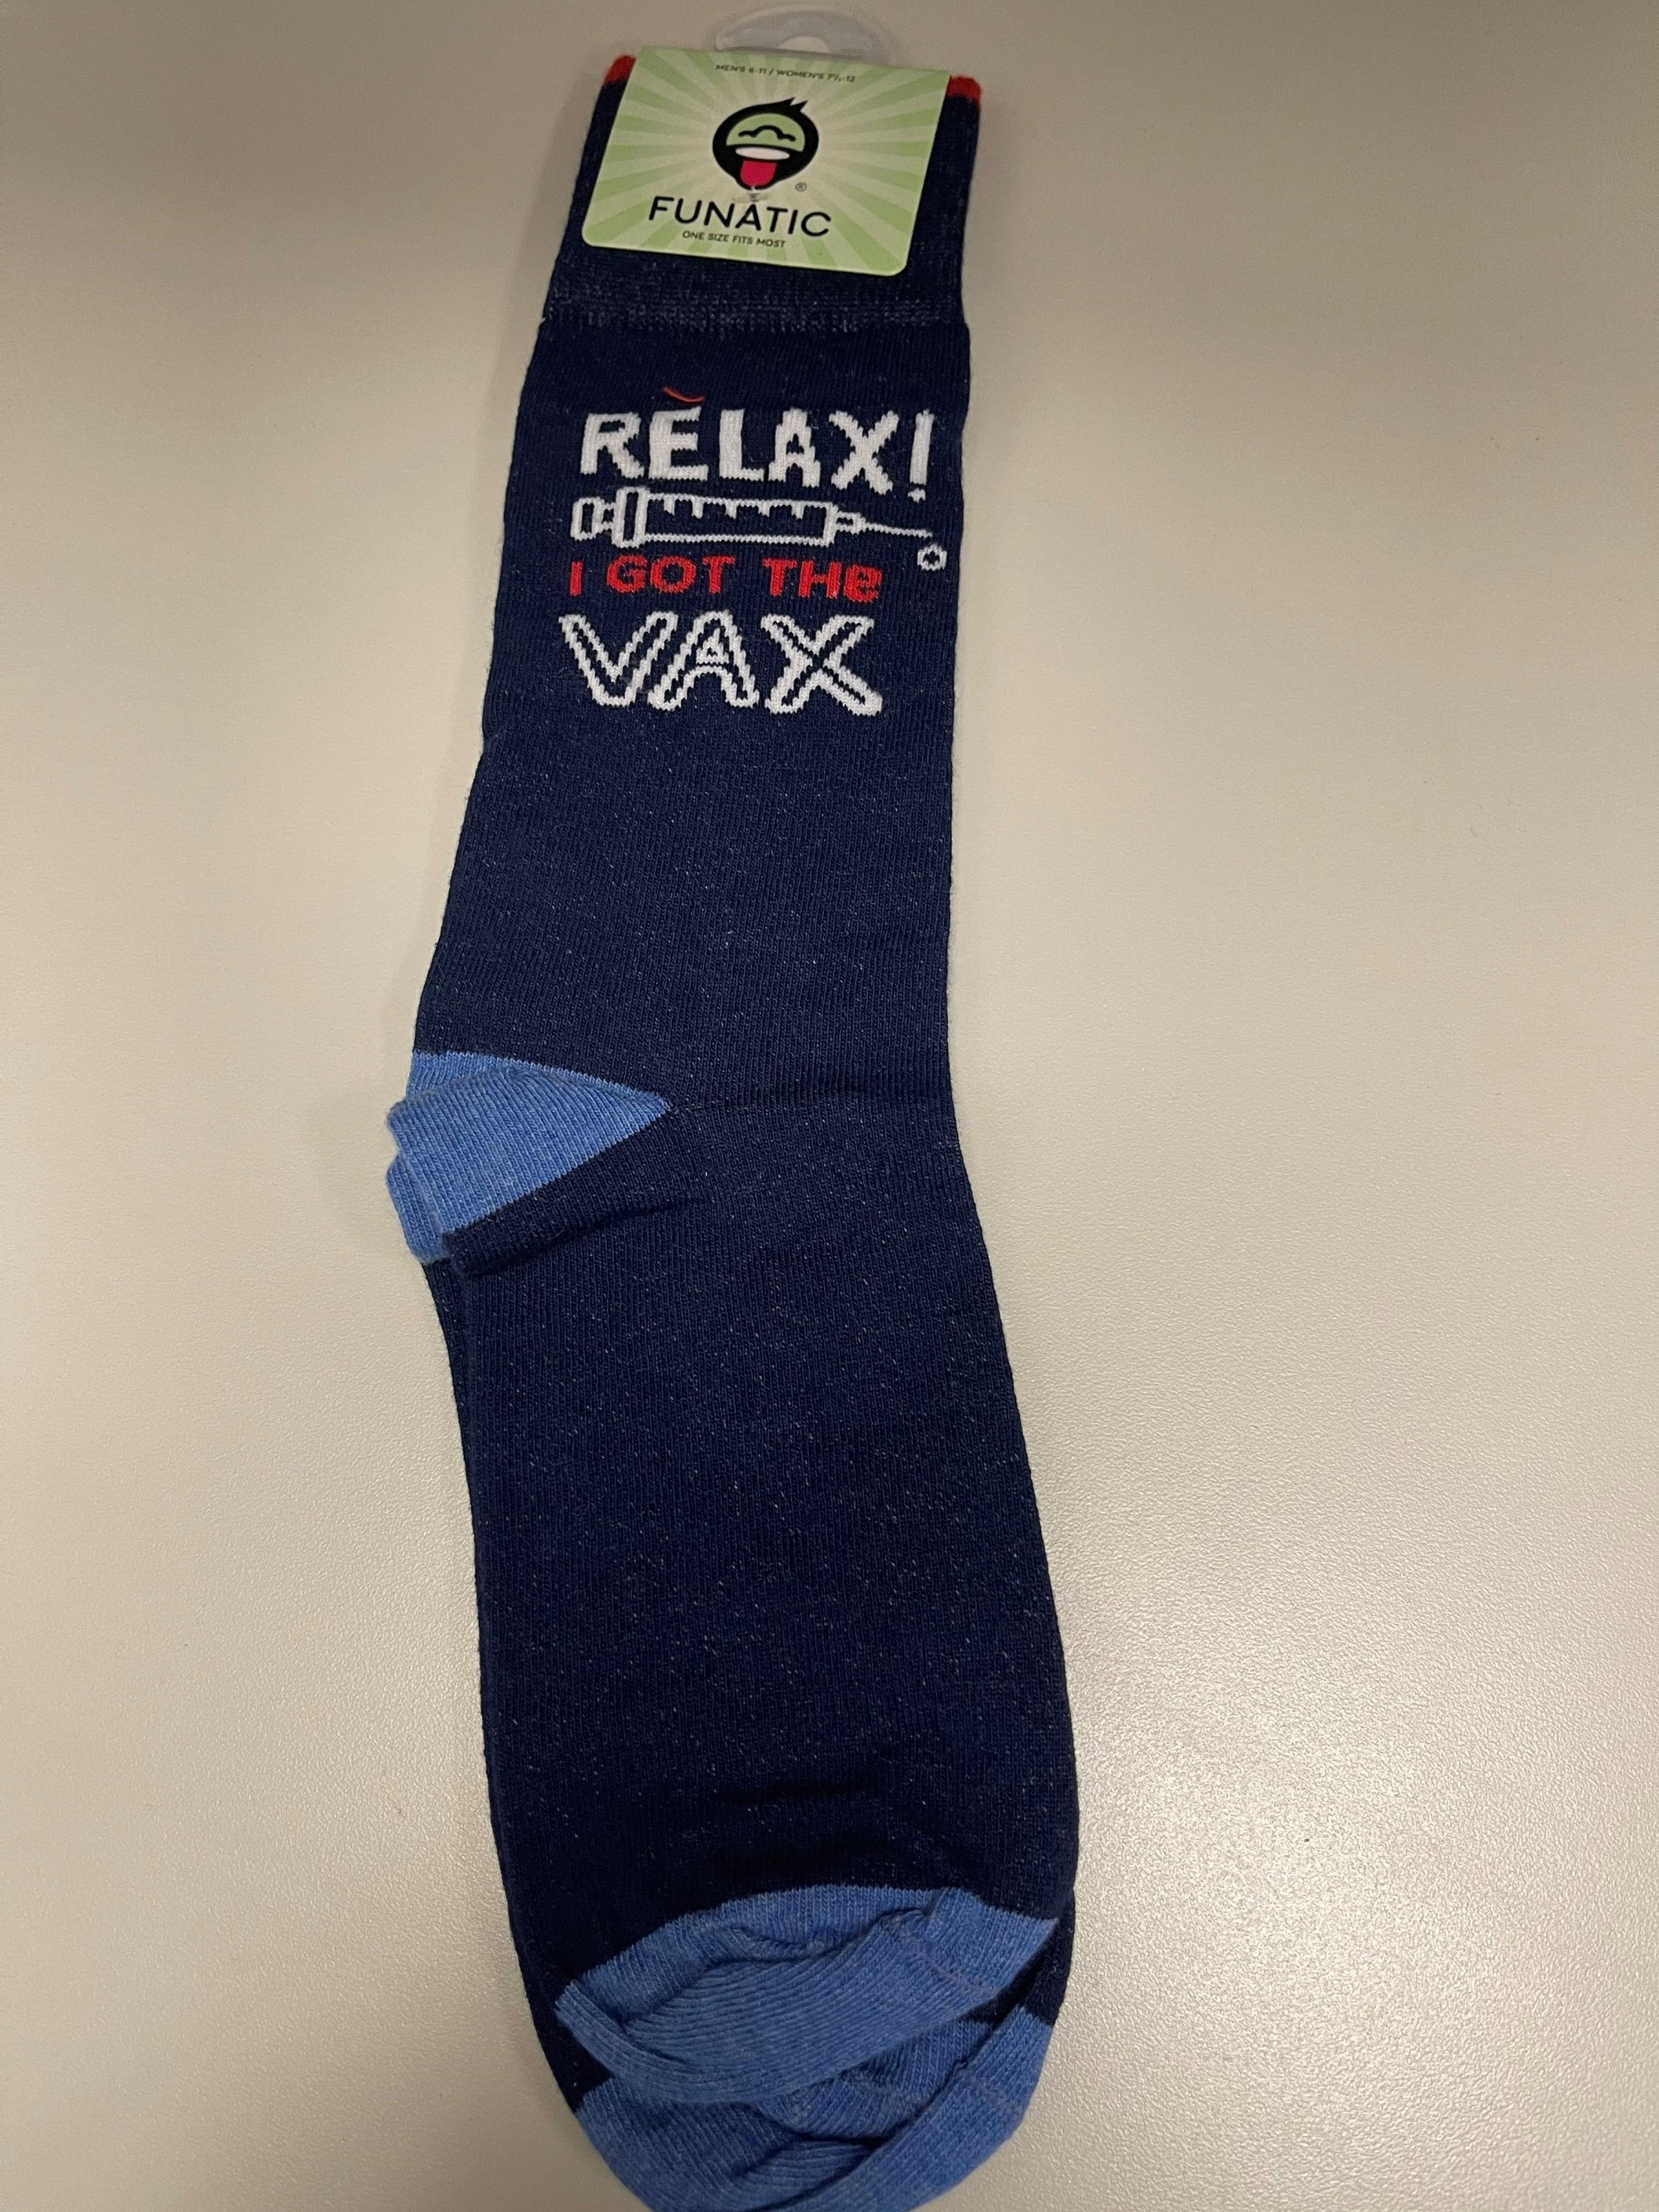 Funatic  Socks - "Relax I Got the Vax" - Navy Blue - One Size Fits All